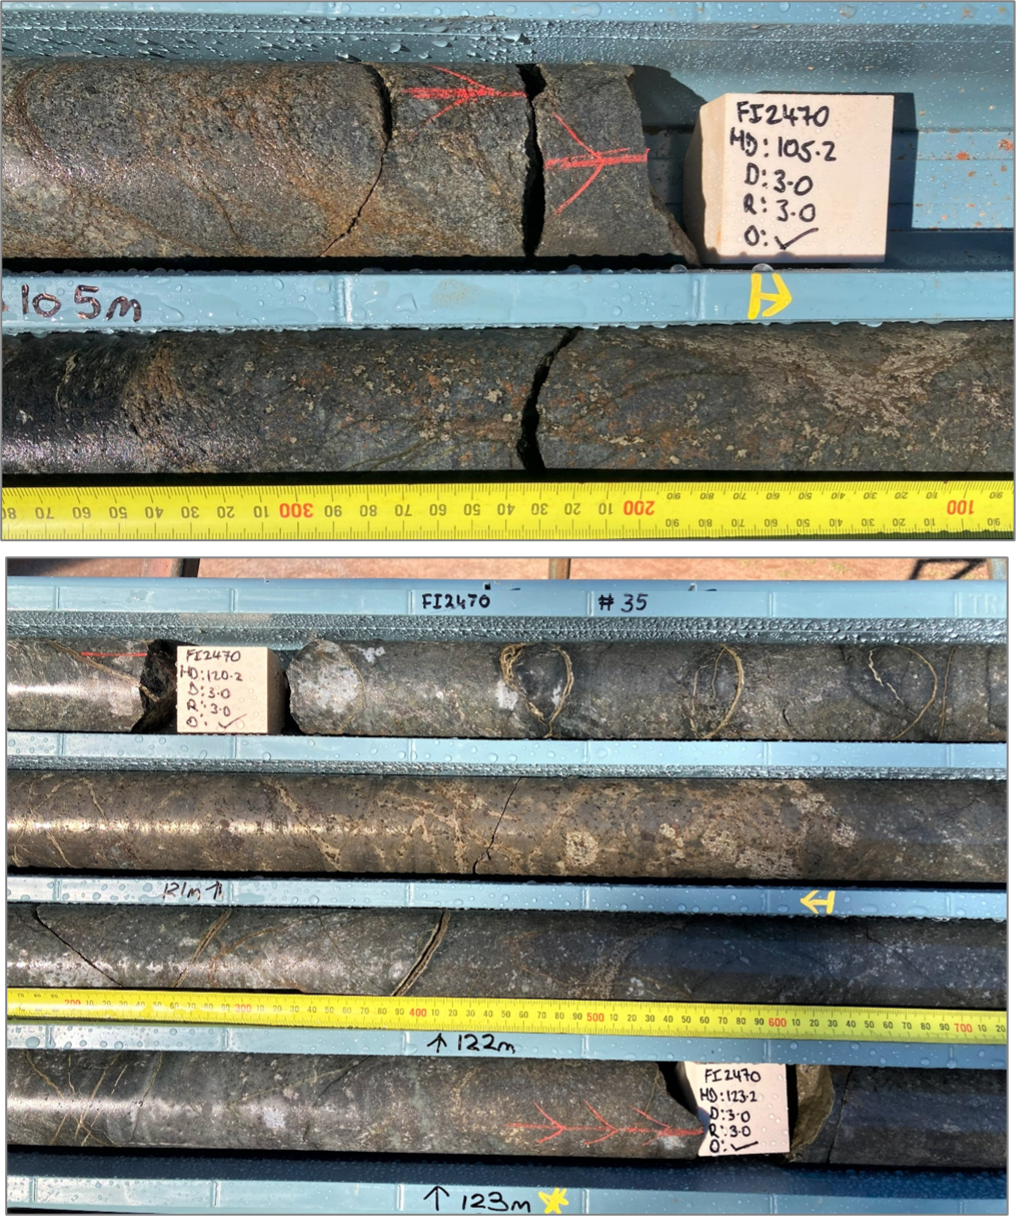 Stringer and heavy disseminated sulphides at 105 metres in FI2470 (upper photo). Massive and strongly disseminated sulphide mineralisation at 121 – 123 metres in FI2470 (lower photo)